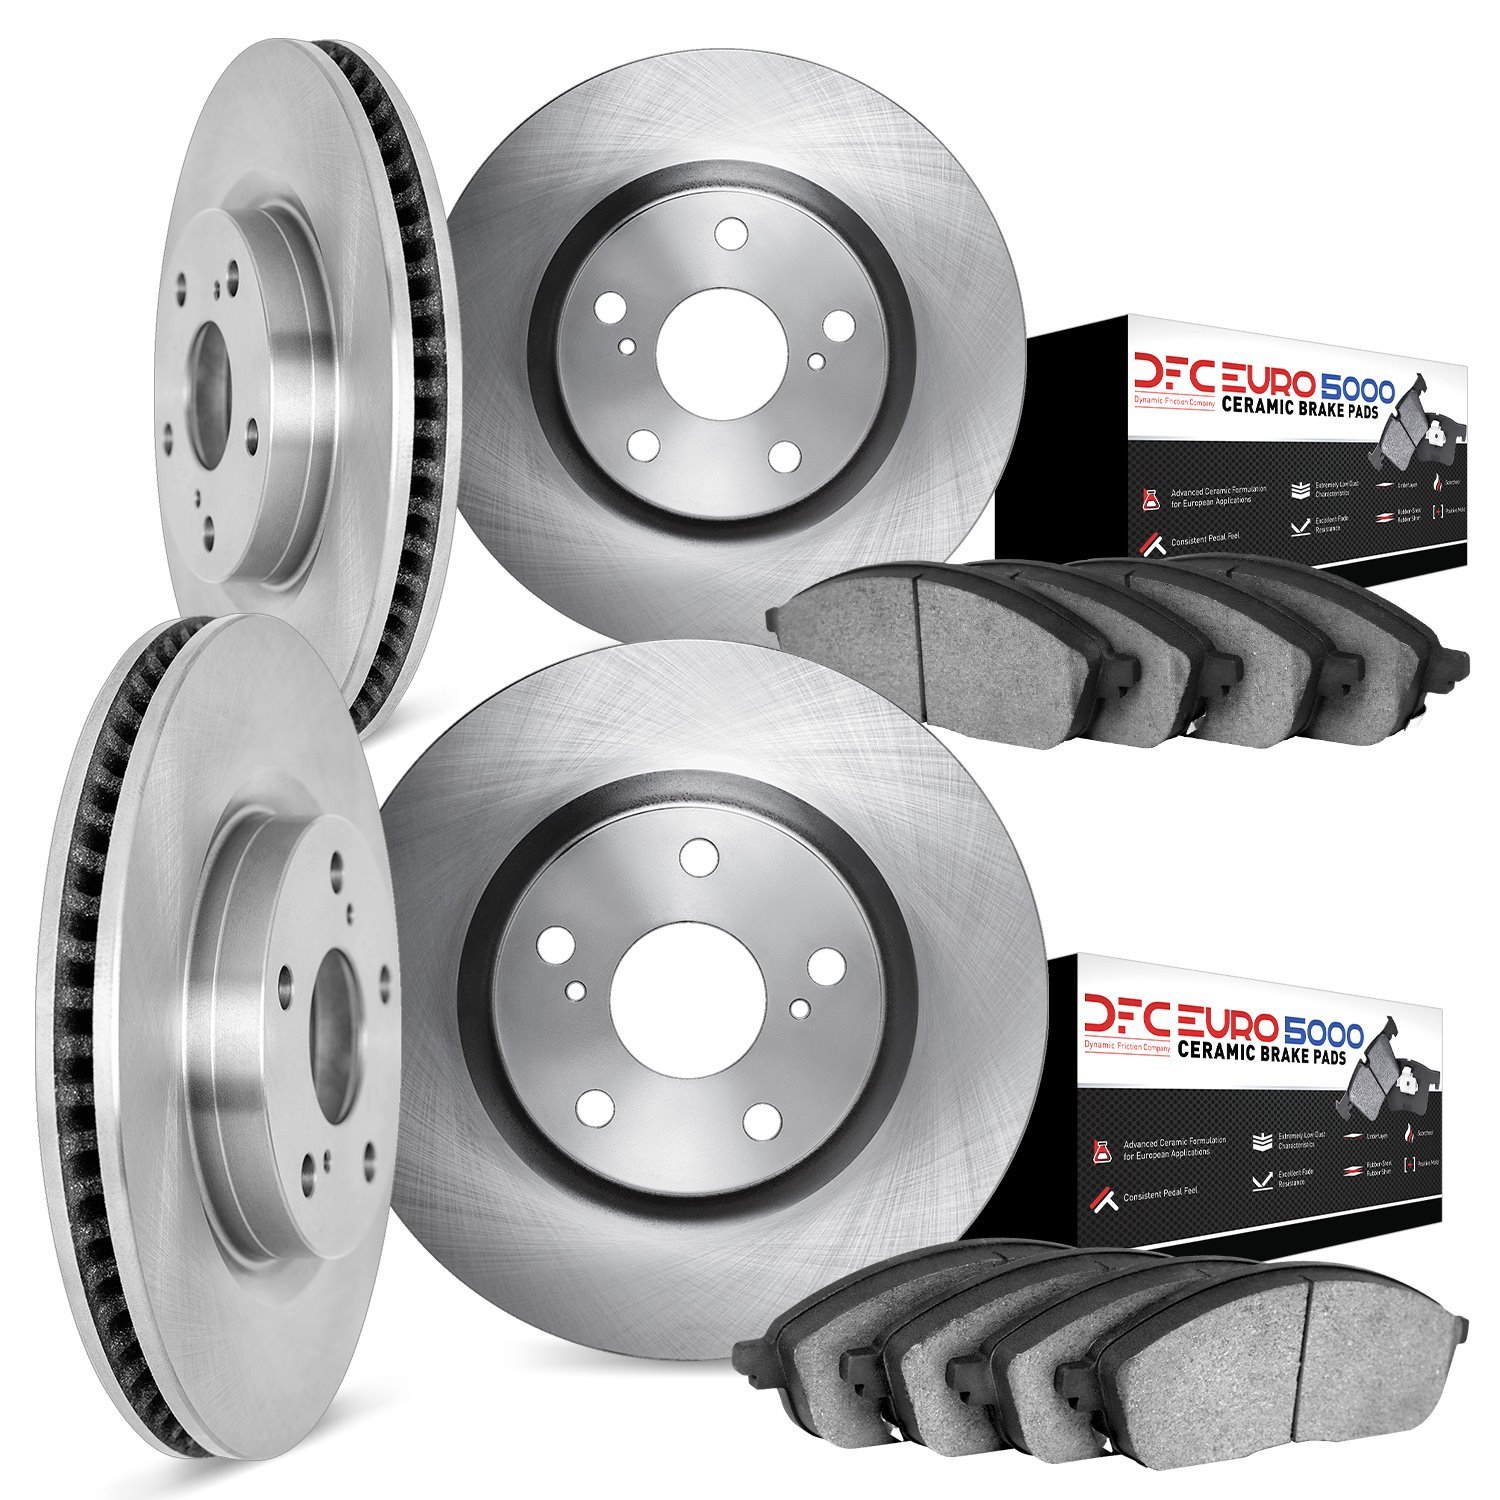 6604-63019 Brake Rotors w/5000 Euro Ceramic Brake Pads, 2002-2009 Mercedes-Benz, Position: Front and Rear